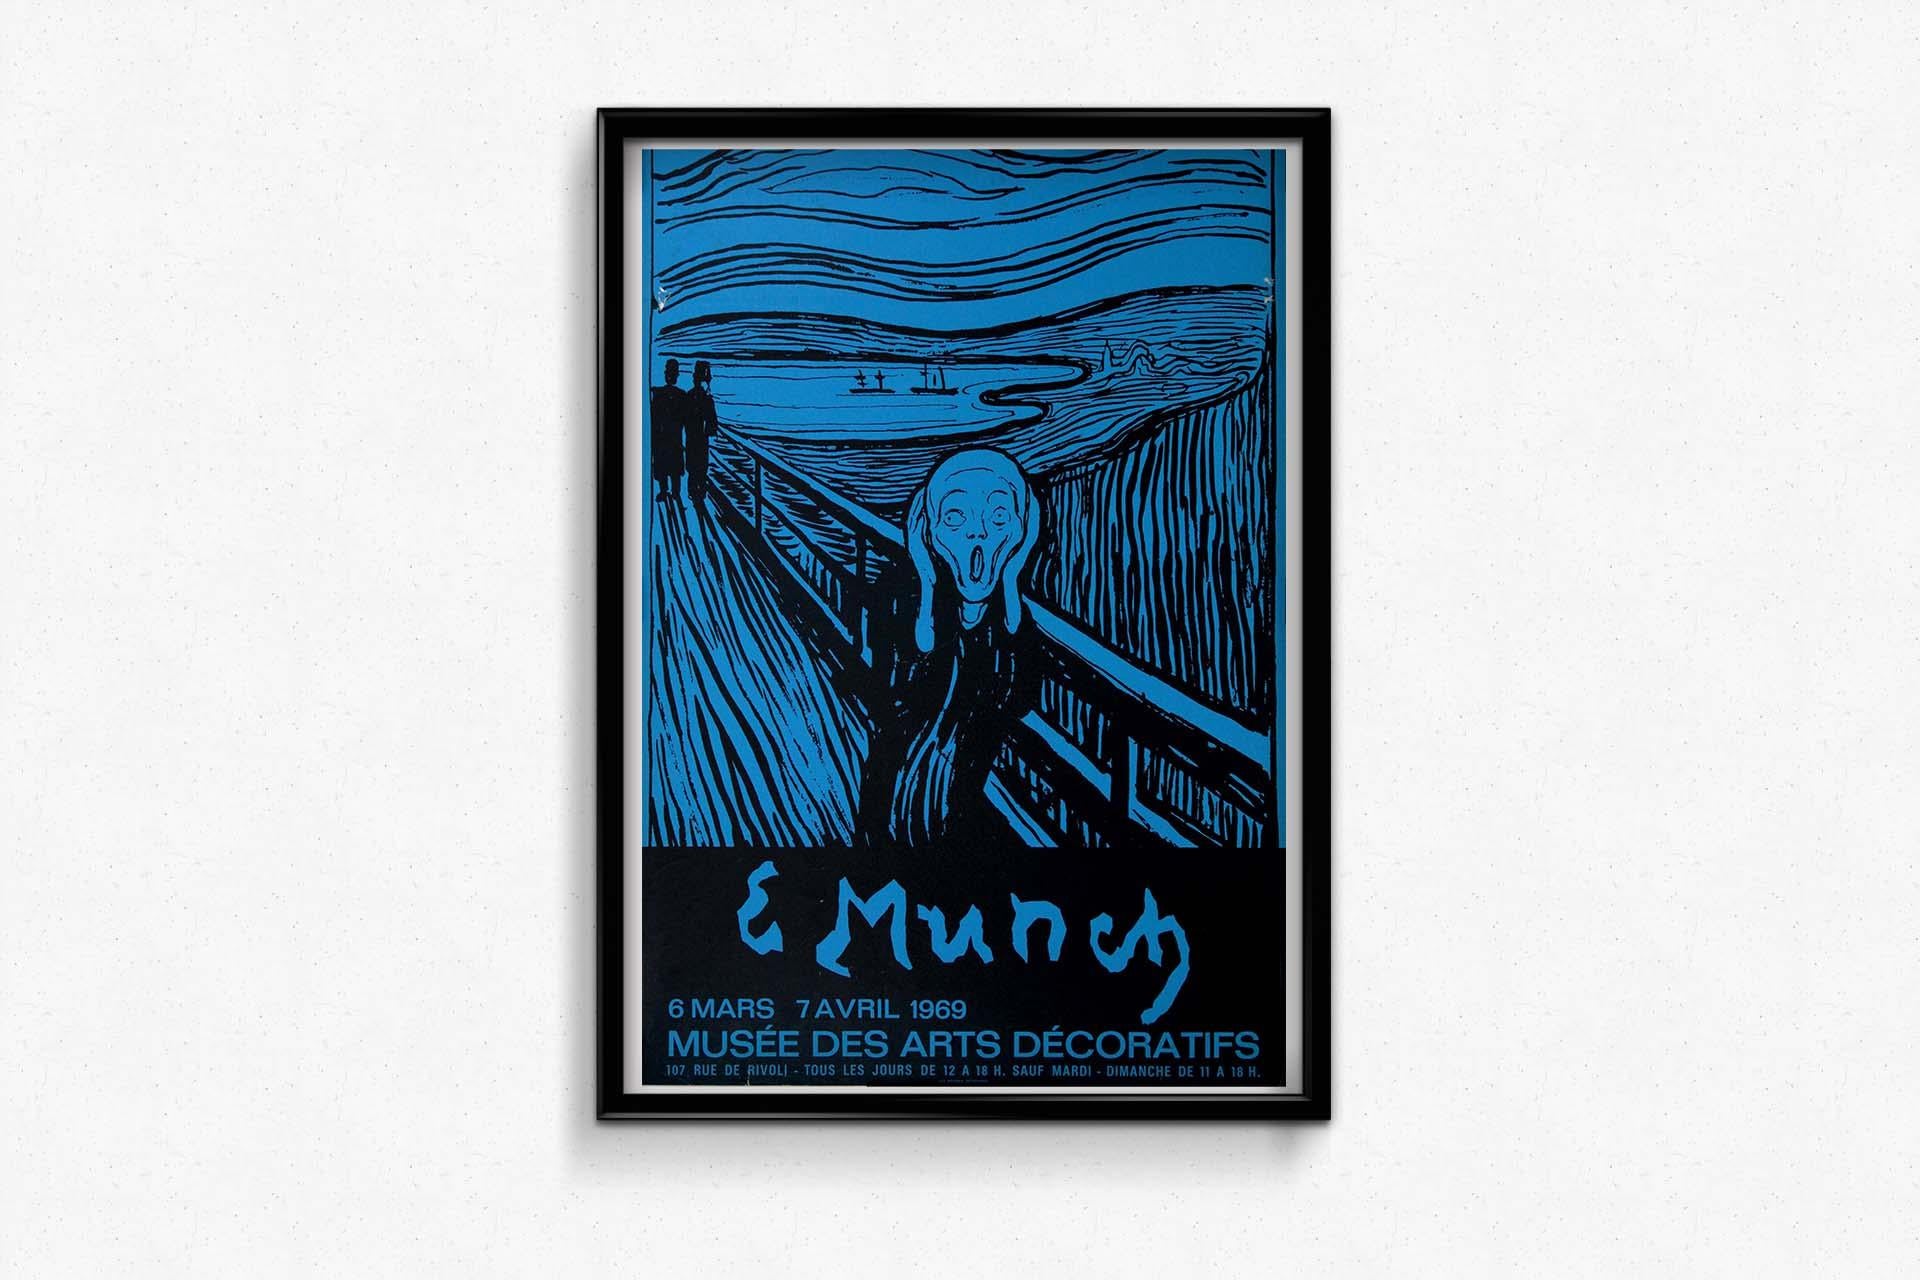 In 1969, the Musée des Arts Décoratifs in Paris bore witness to a profound artistic convergence as it hosted an exclusive exhibition showcasing the masterpieces of Edward Munch. This original poster, crafted to herald the event, served as a